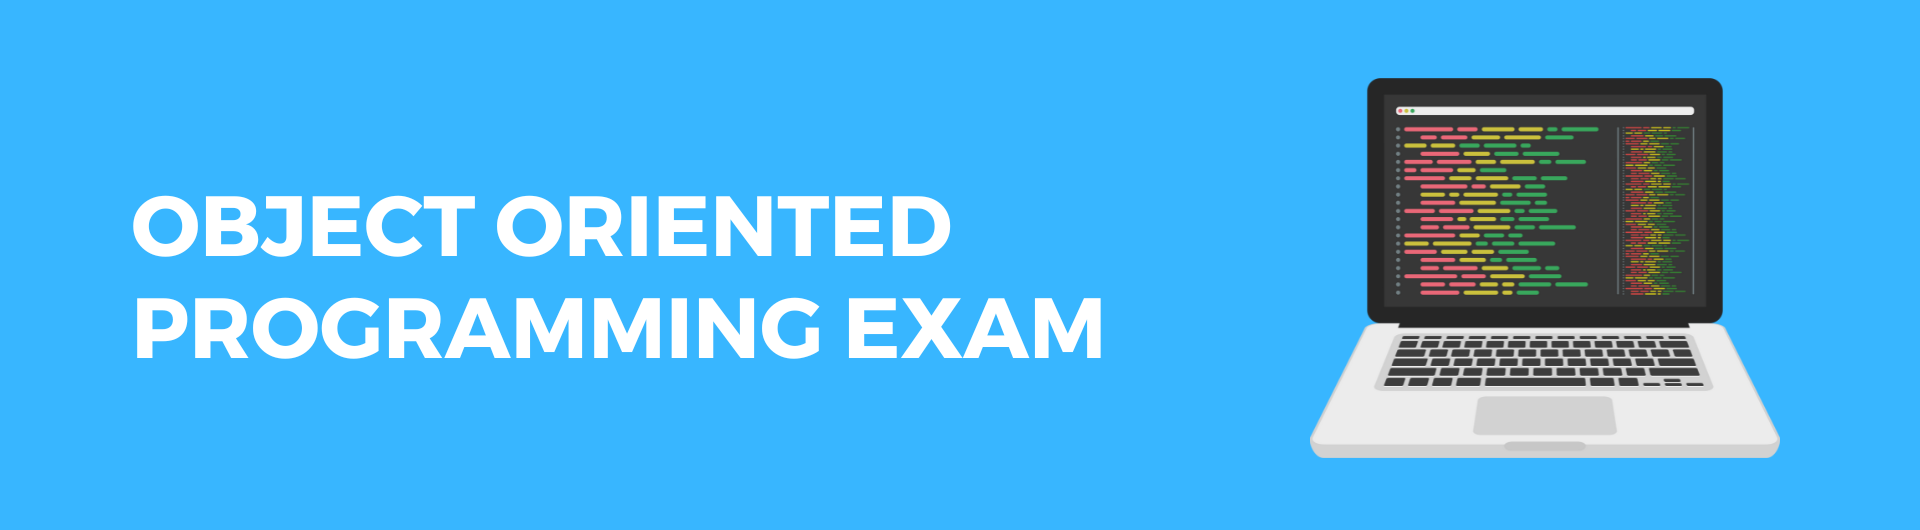 Object Oriented Programming exam